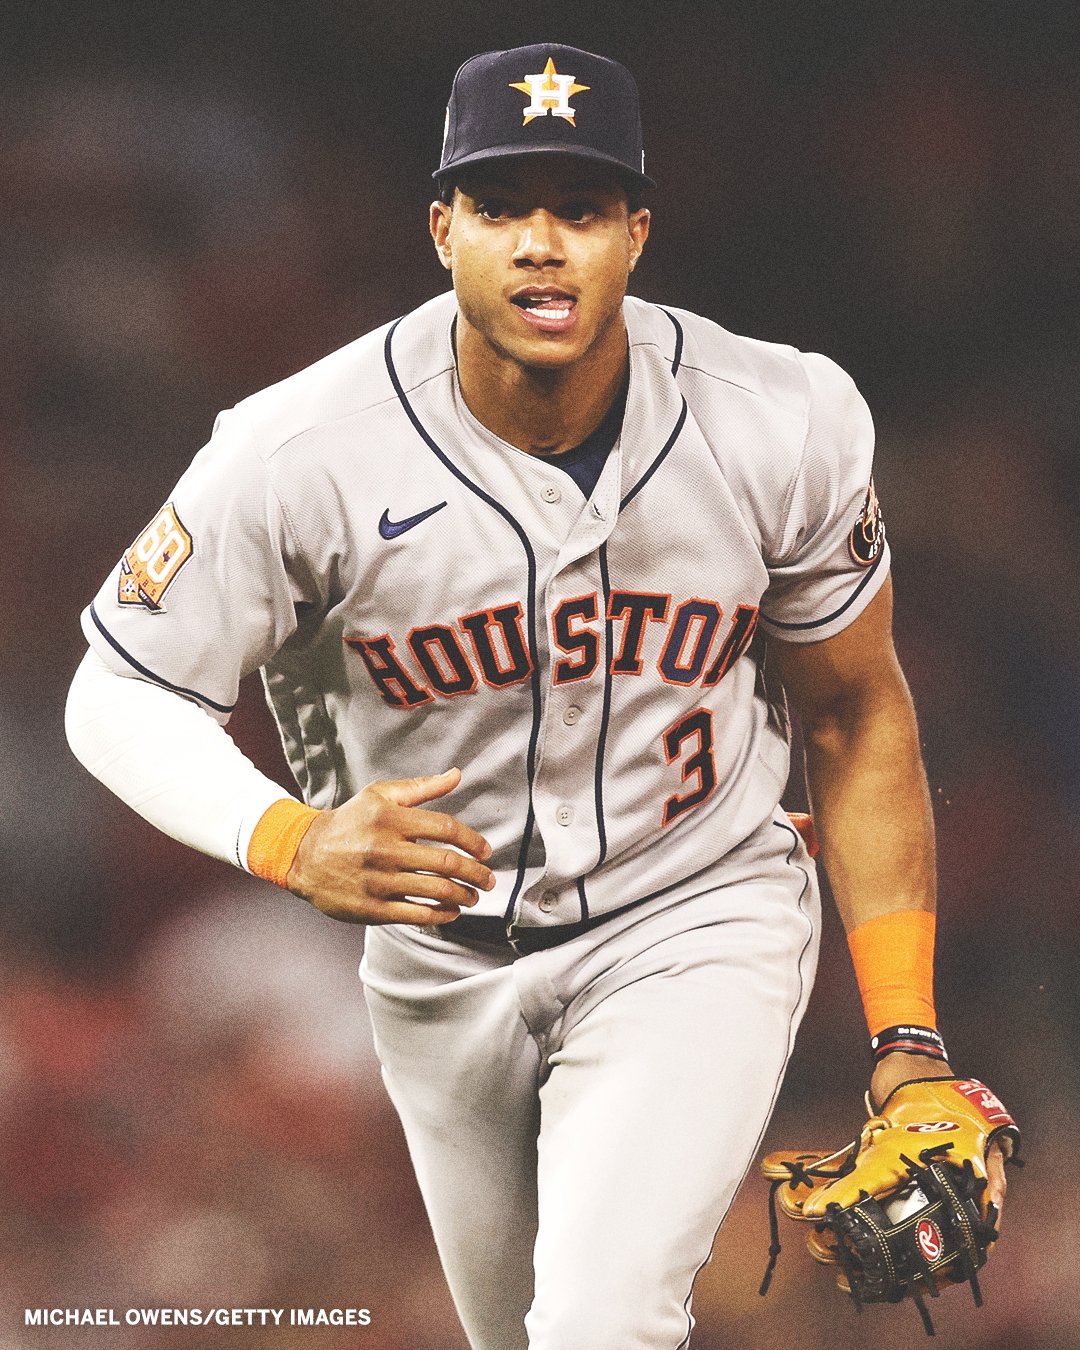 ESPN+ on X: Astros rookie Jeremy Peña already looks like a Gold Glove  candidate, leading the major league among shortstops in defensive runs  saved. 👀 Full MLB rookie rankings here 🔗